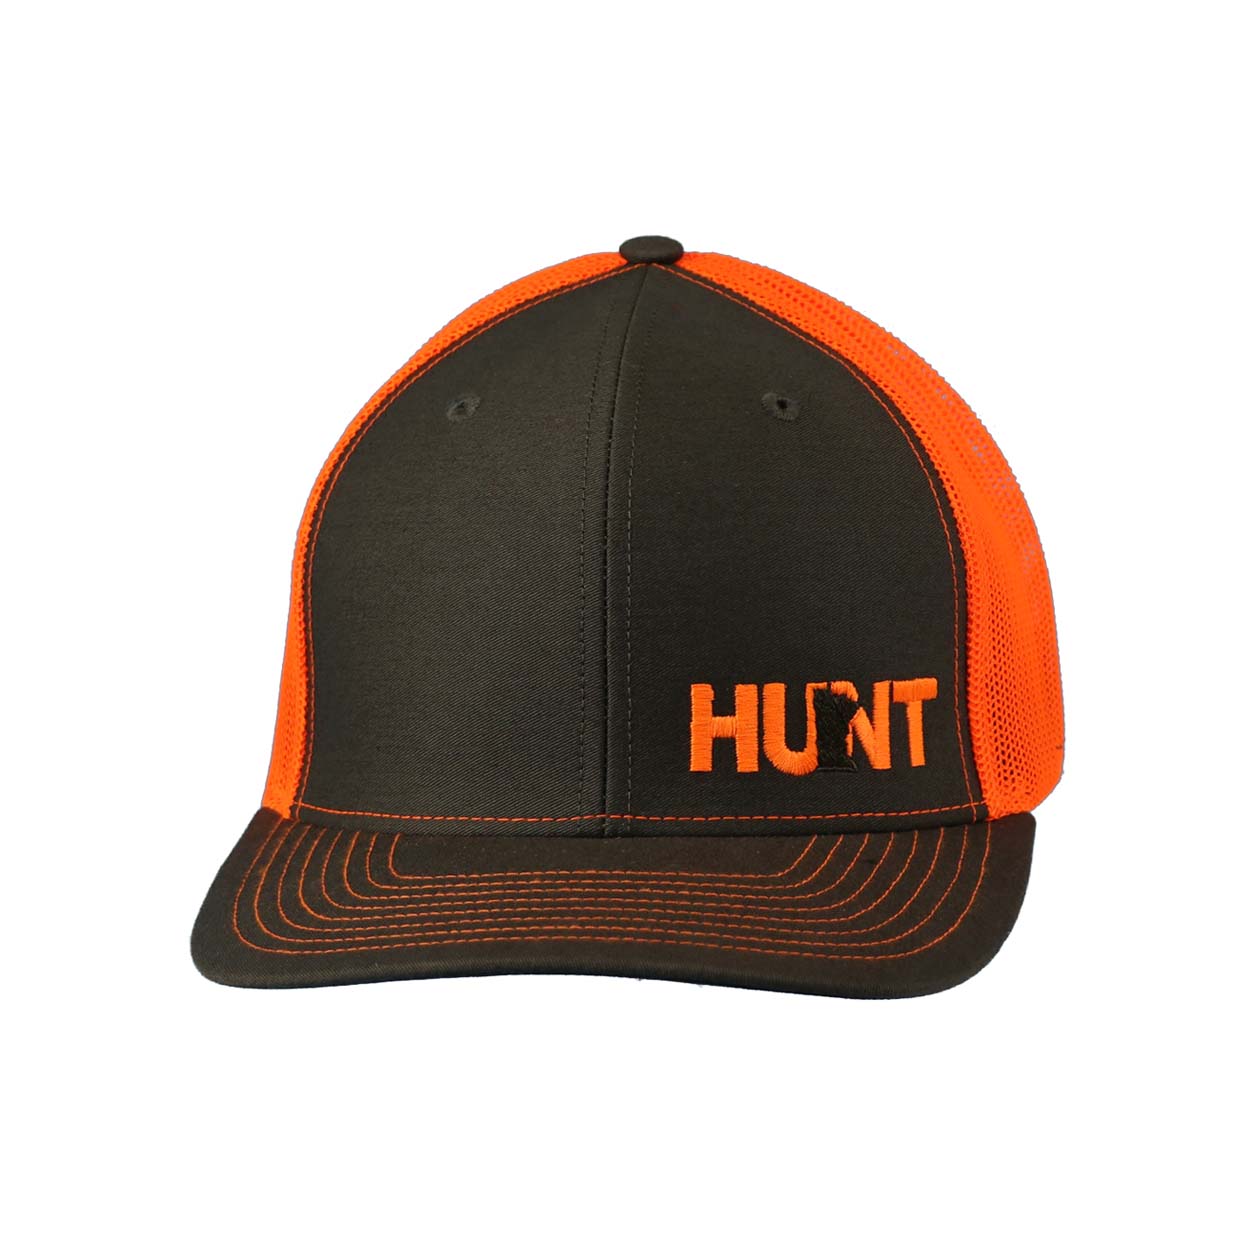 Hunt Minnesota Night Out Embroidered Snapback Trucker Hat Charcoal/Orange